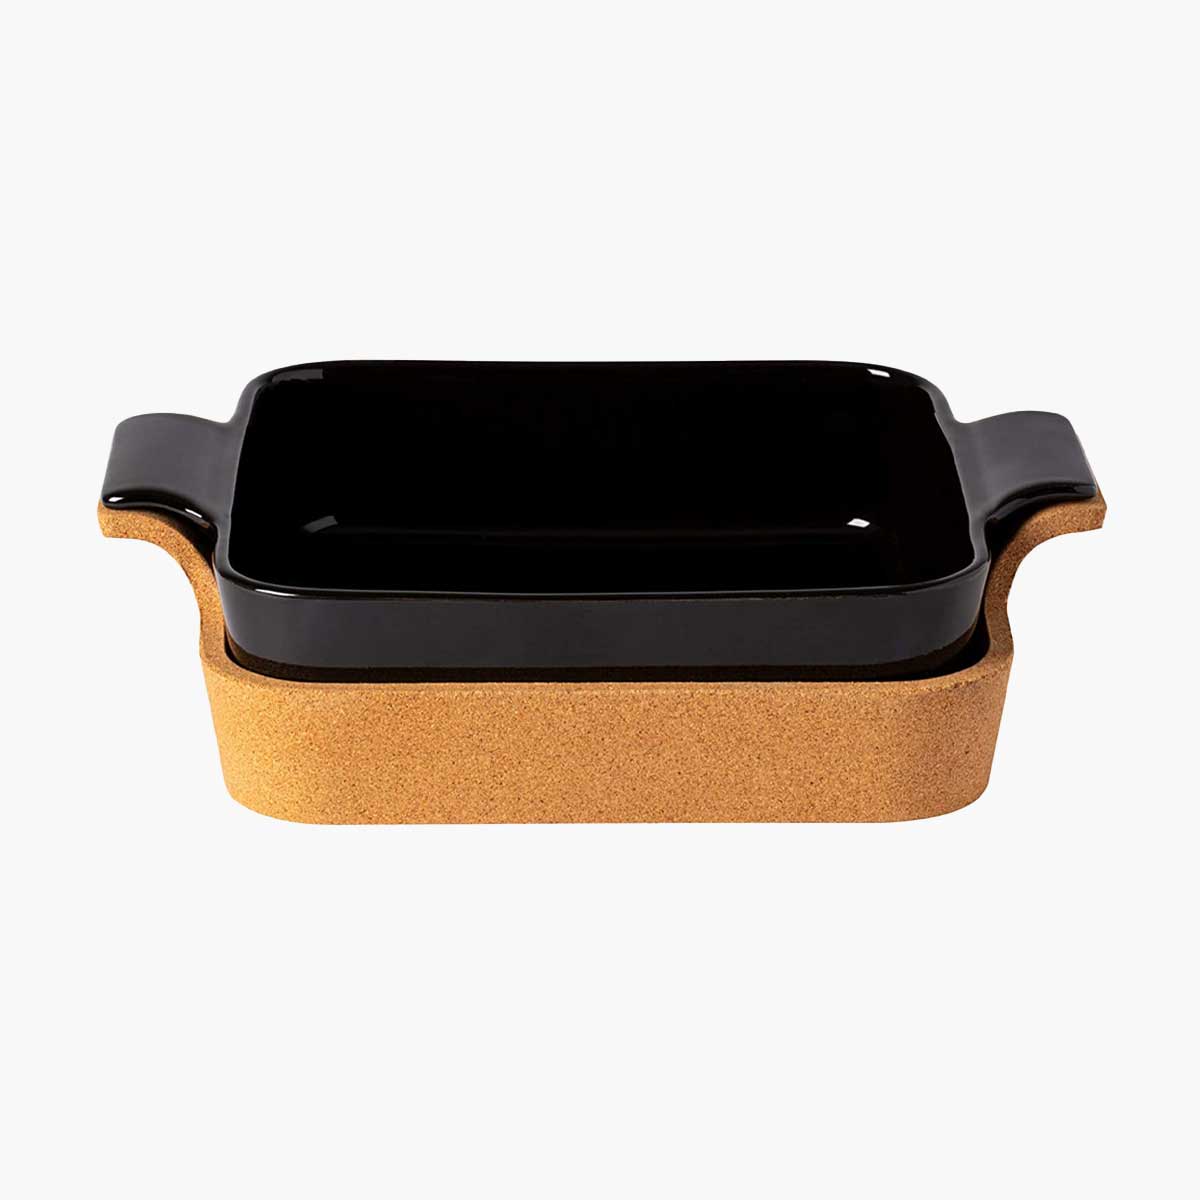 A rectangular black casserole dish in a cork tray, one of Oprah's 12 favorite kitchen gifts for 2021.